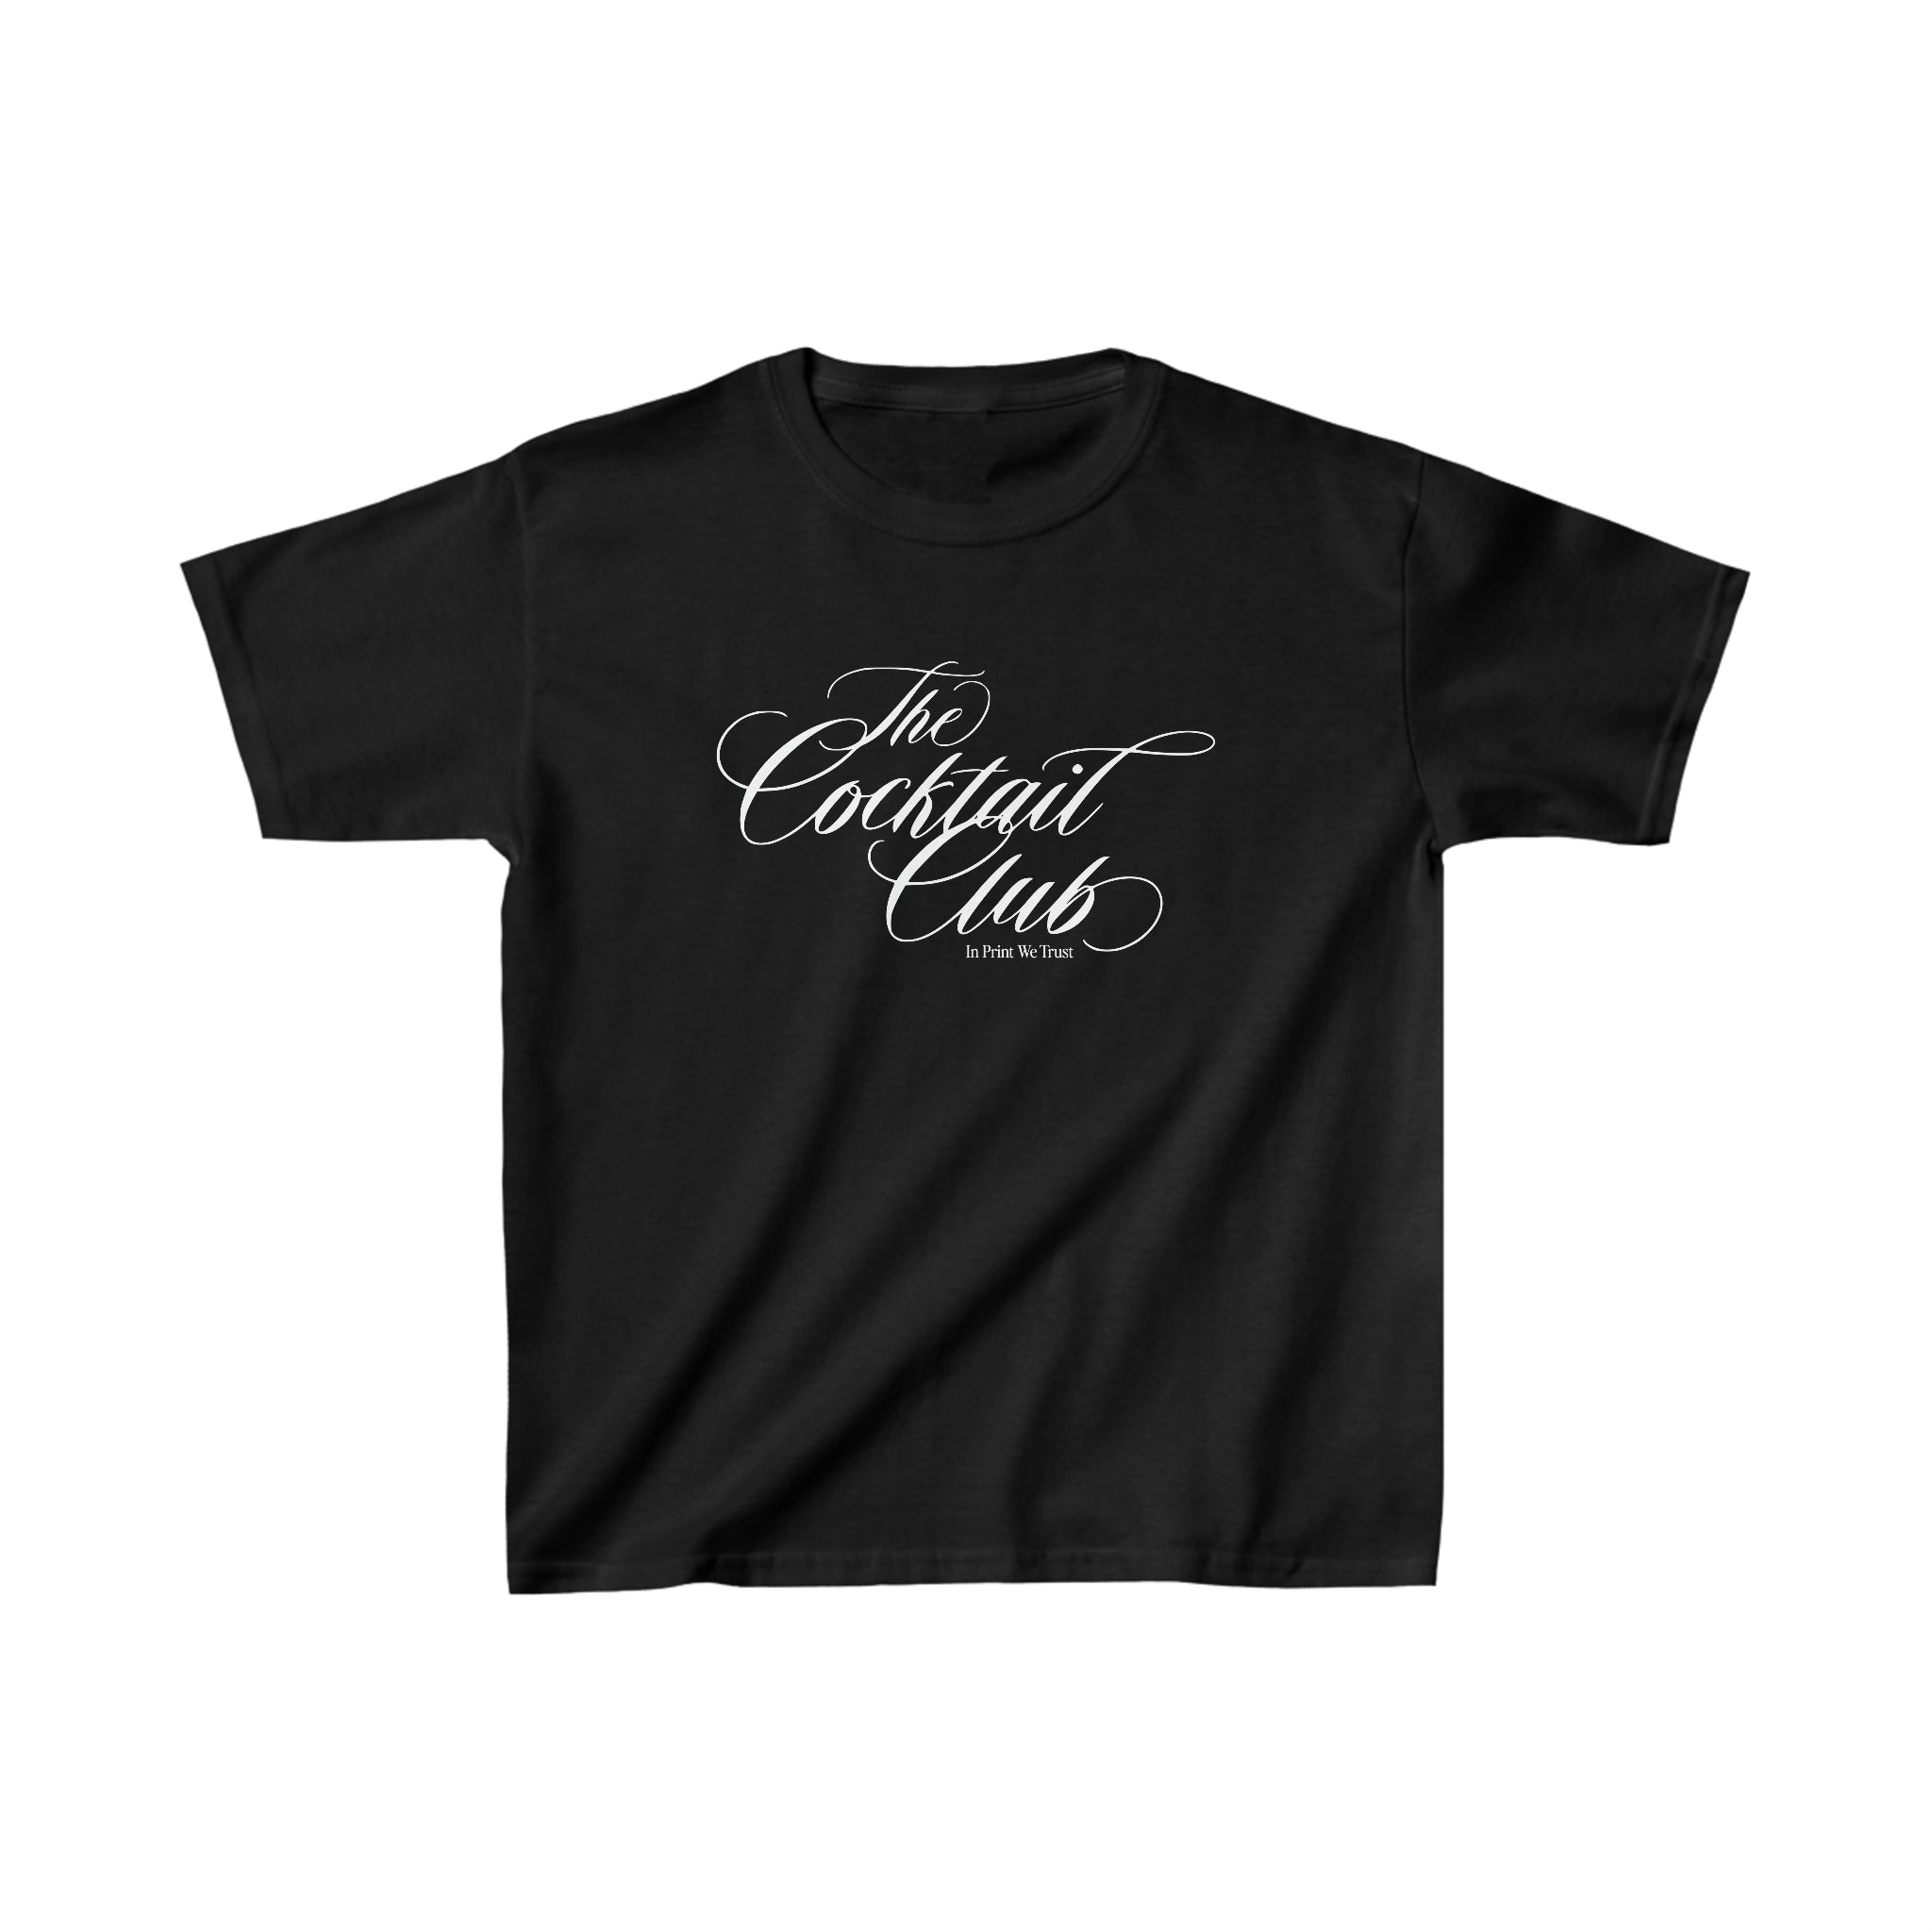 'The Cocktail Club' baby tee - In Print We Trust